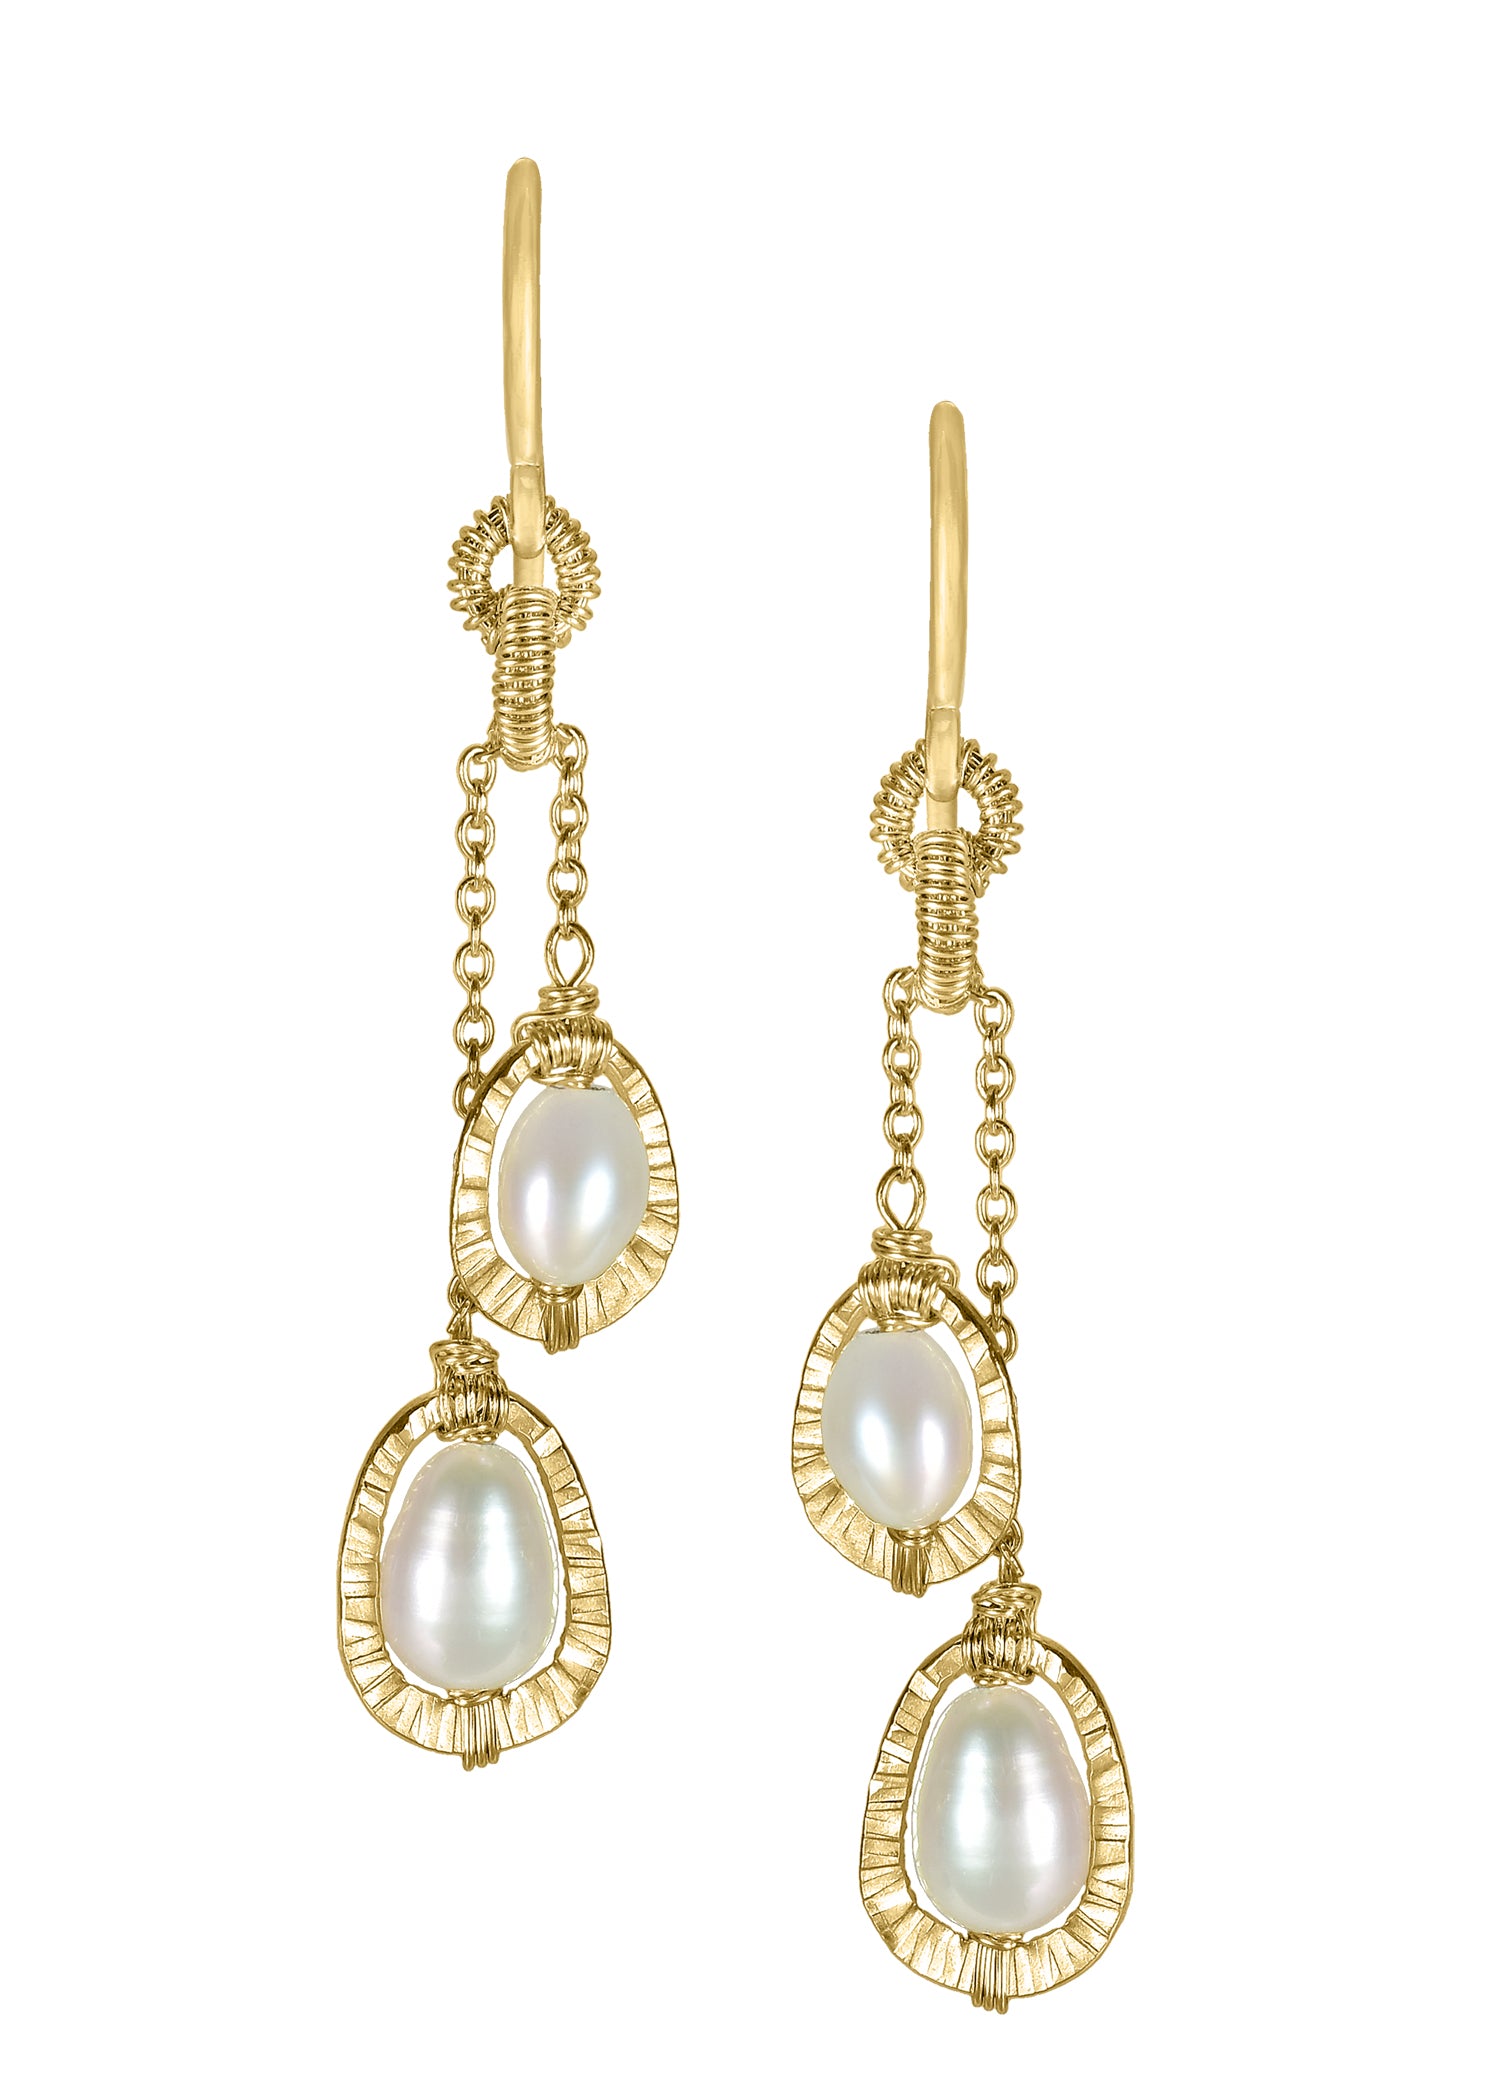 Freshwater pearl 14k gold fill Earrings measure 1-11/16" in length (including the ear wires) Bottom drop measures 1/4" in width Handmade in our Los Angeles studio